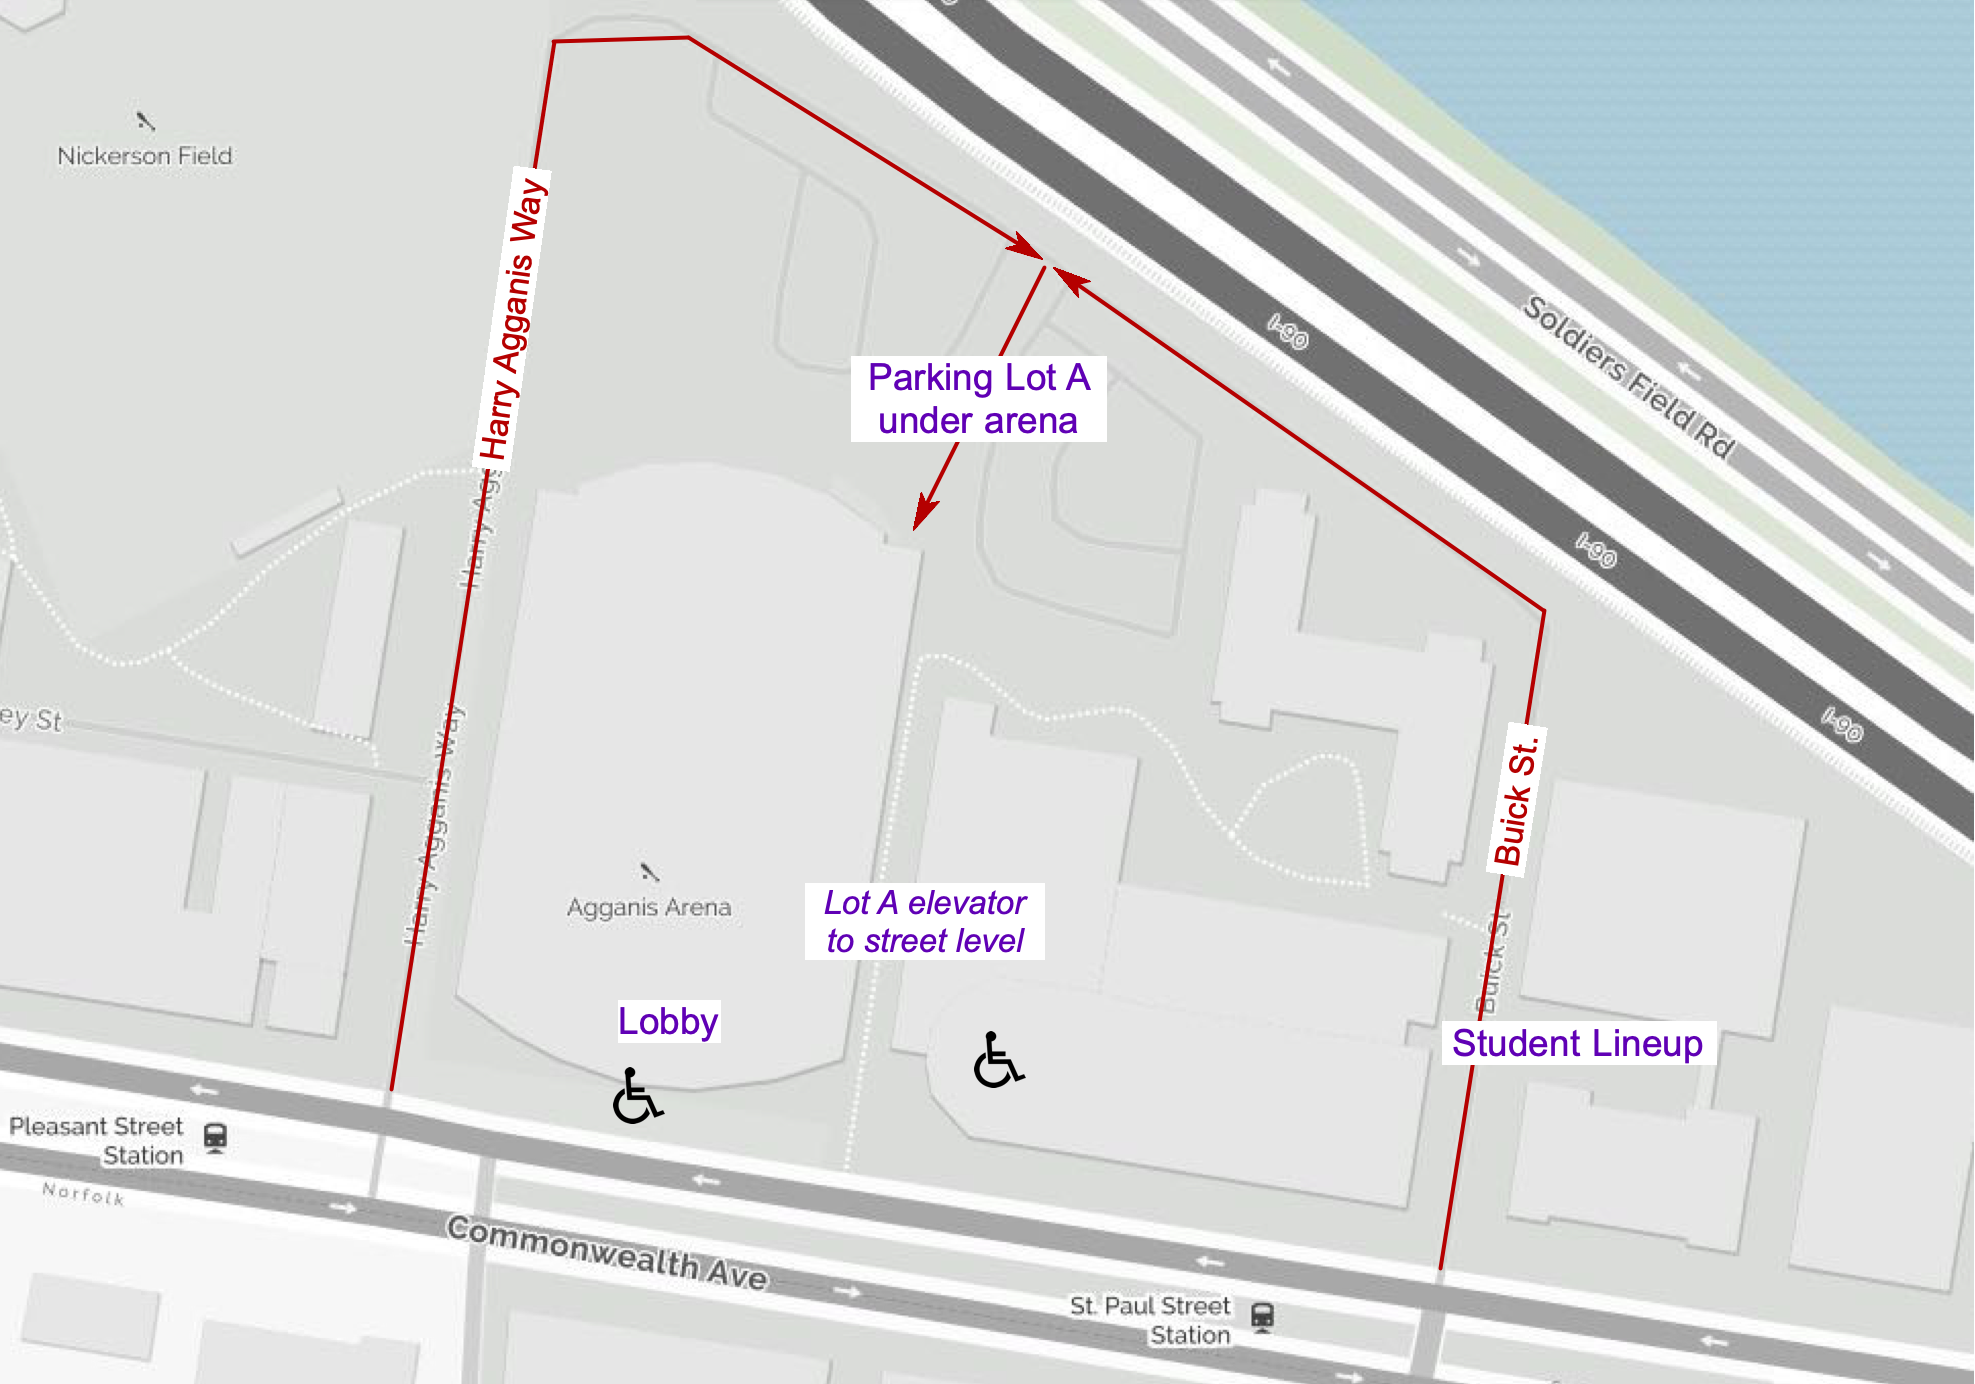 Map of FitRec area for student lineup